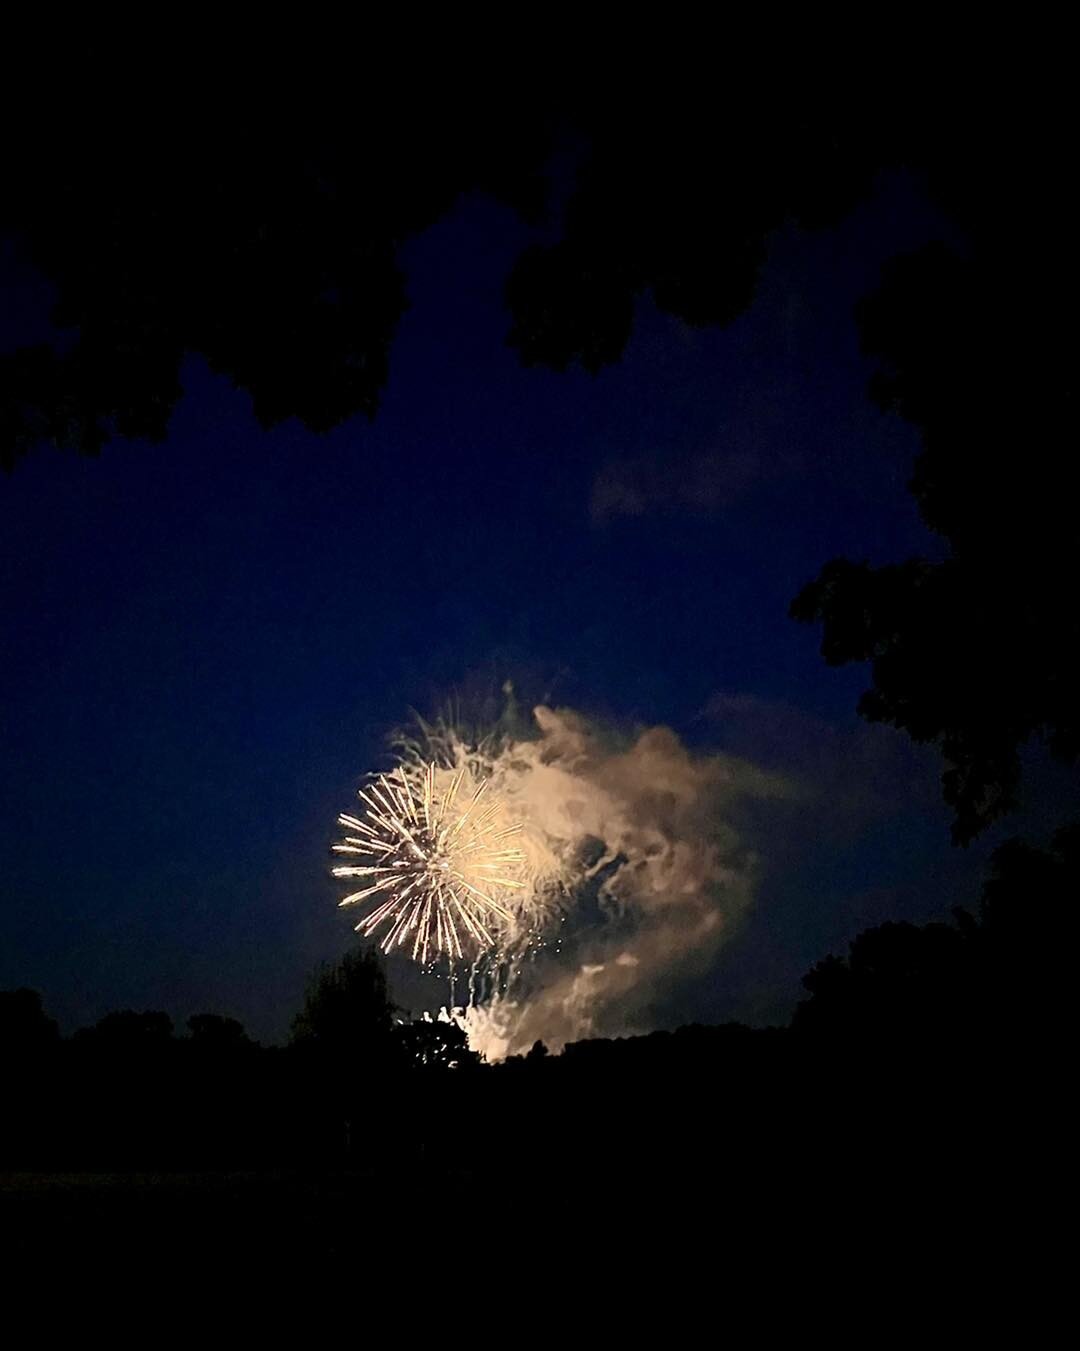 Sheep 🐑 pasture with THE MOST tonight 💥 🎆! 
Thanks to Rock Island Farms for the spectacular display once again that we are blessed to enjoy while swinging in the front yard, looking out over the sheep and chickens and their pastures. It&rsquo;s pr